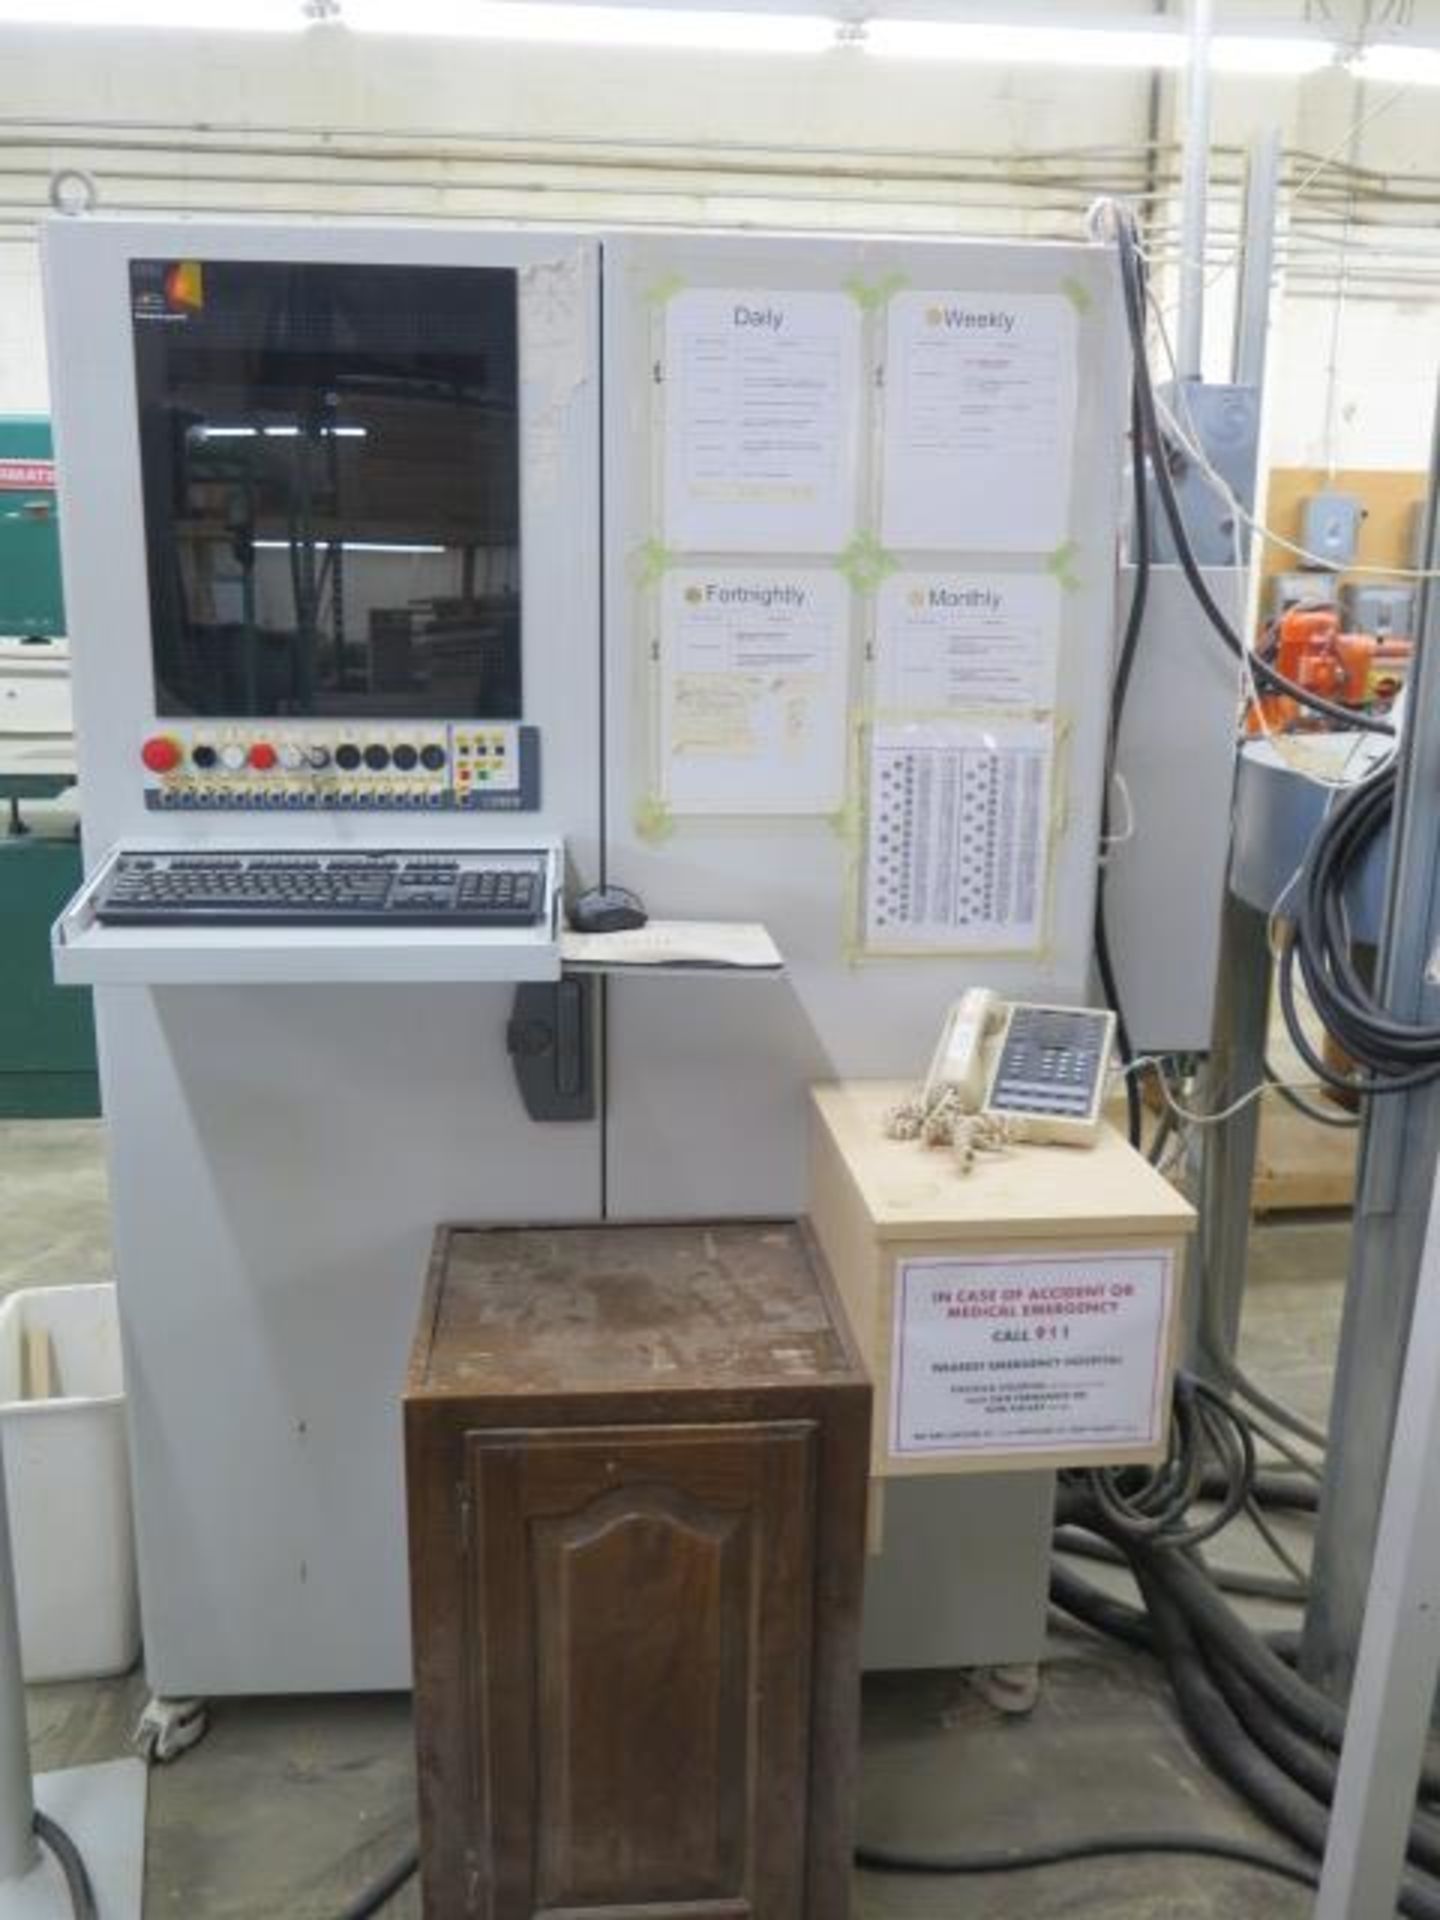 2006 Biesse Rover B4.40 FT-K 16-Spindle CNC Router s/n 59006 w/ Biesse CNC Controls, SOLD AS IS - Image 14 of 24